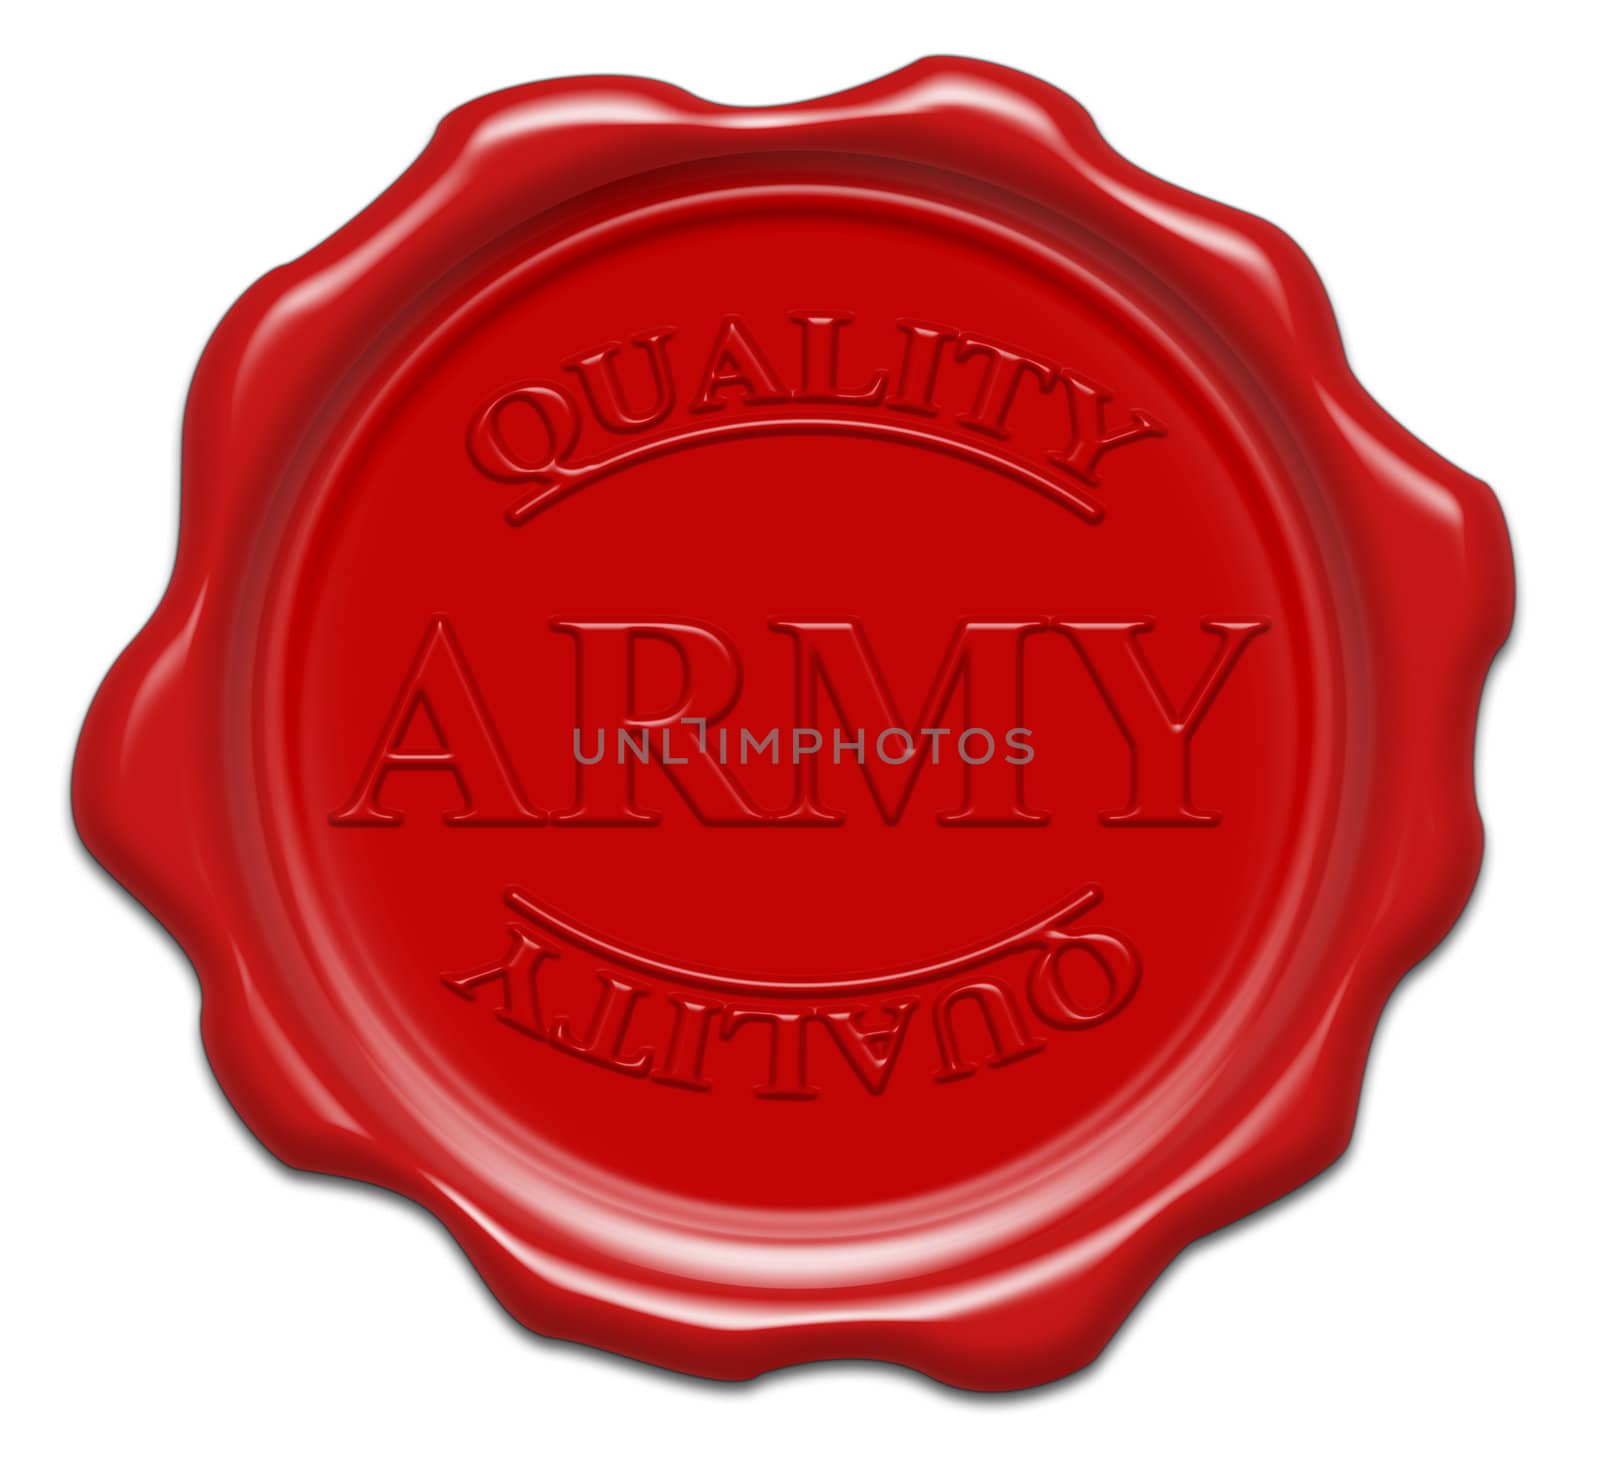 army quality - illustration red wax seal isolated on white background with word : army